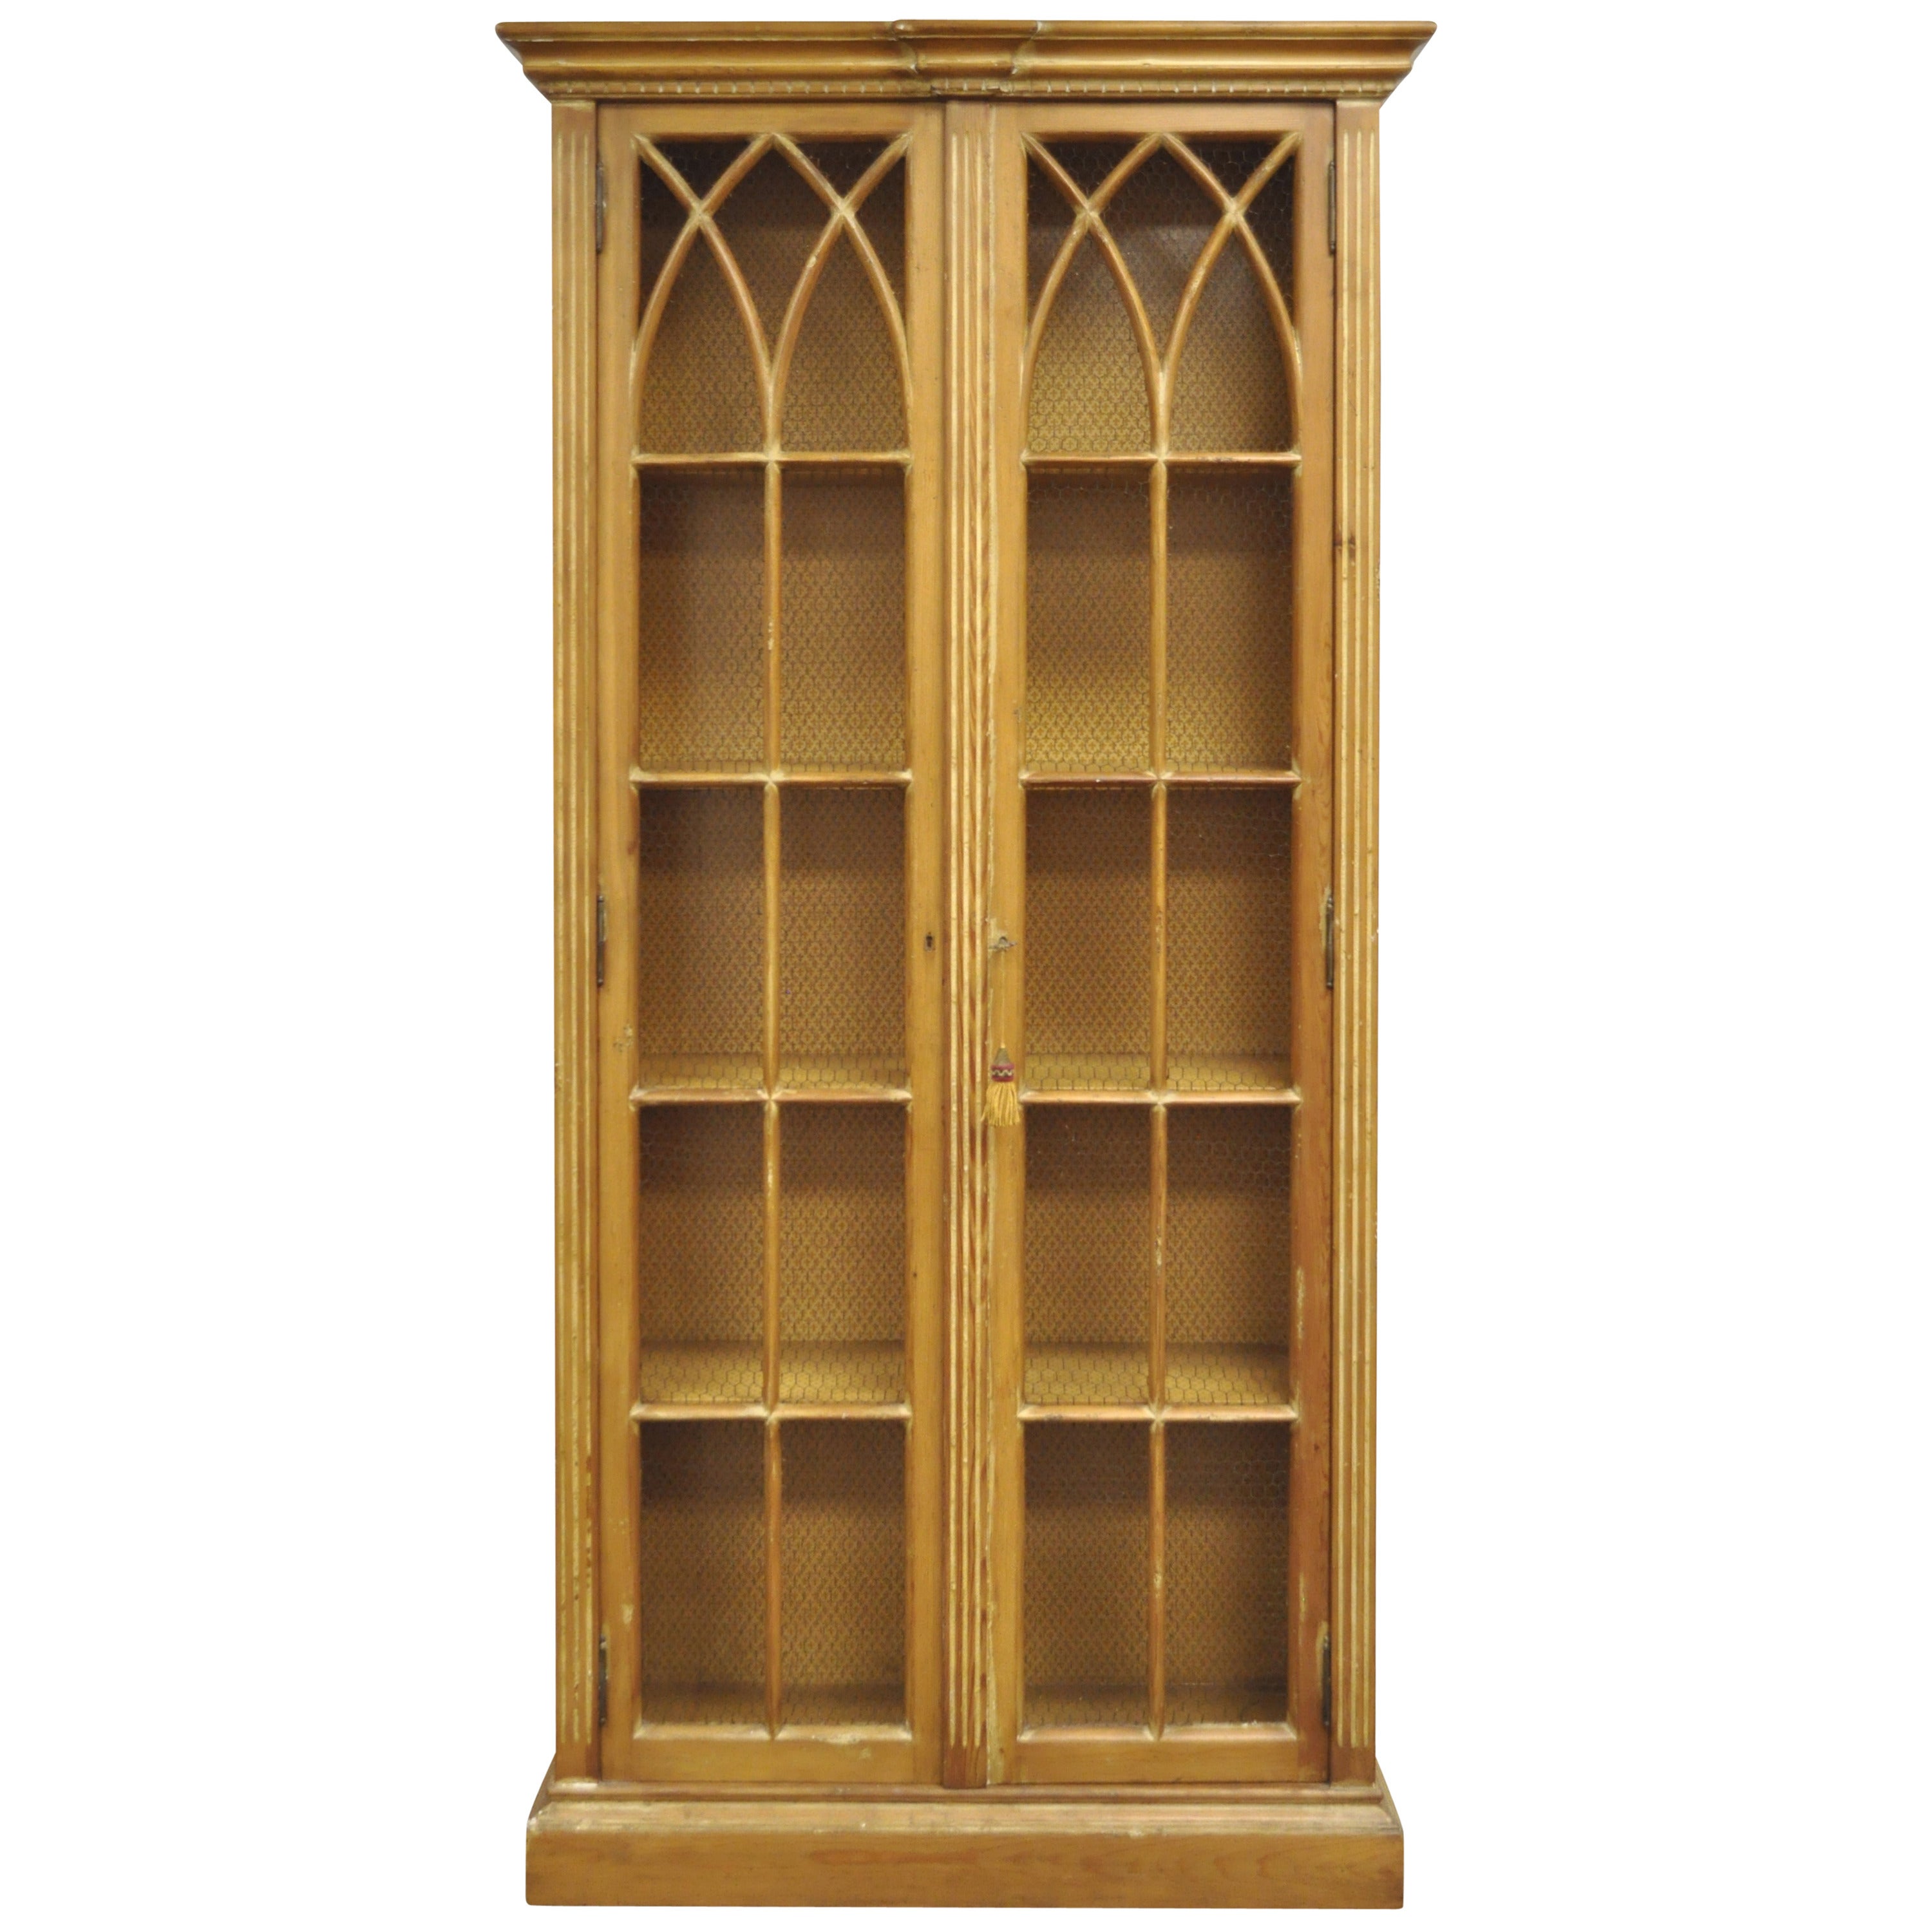 Antiqued and Distress Finished Italian Bookcase in the Mission or Gothic Style